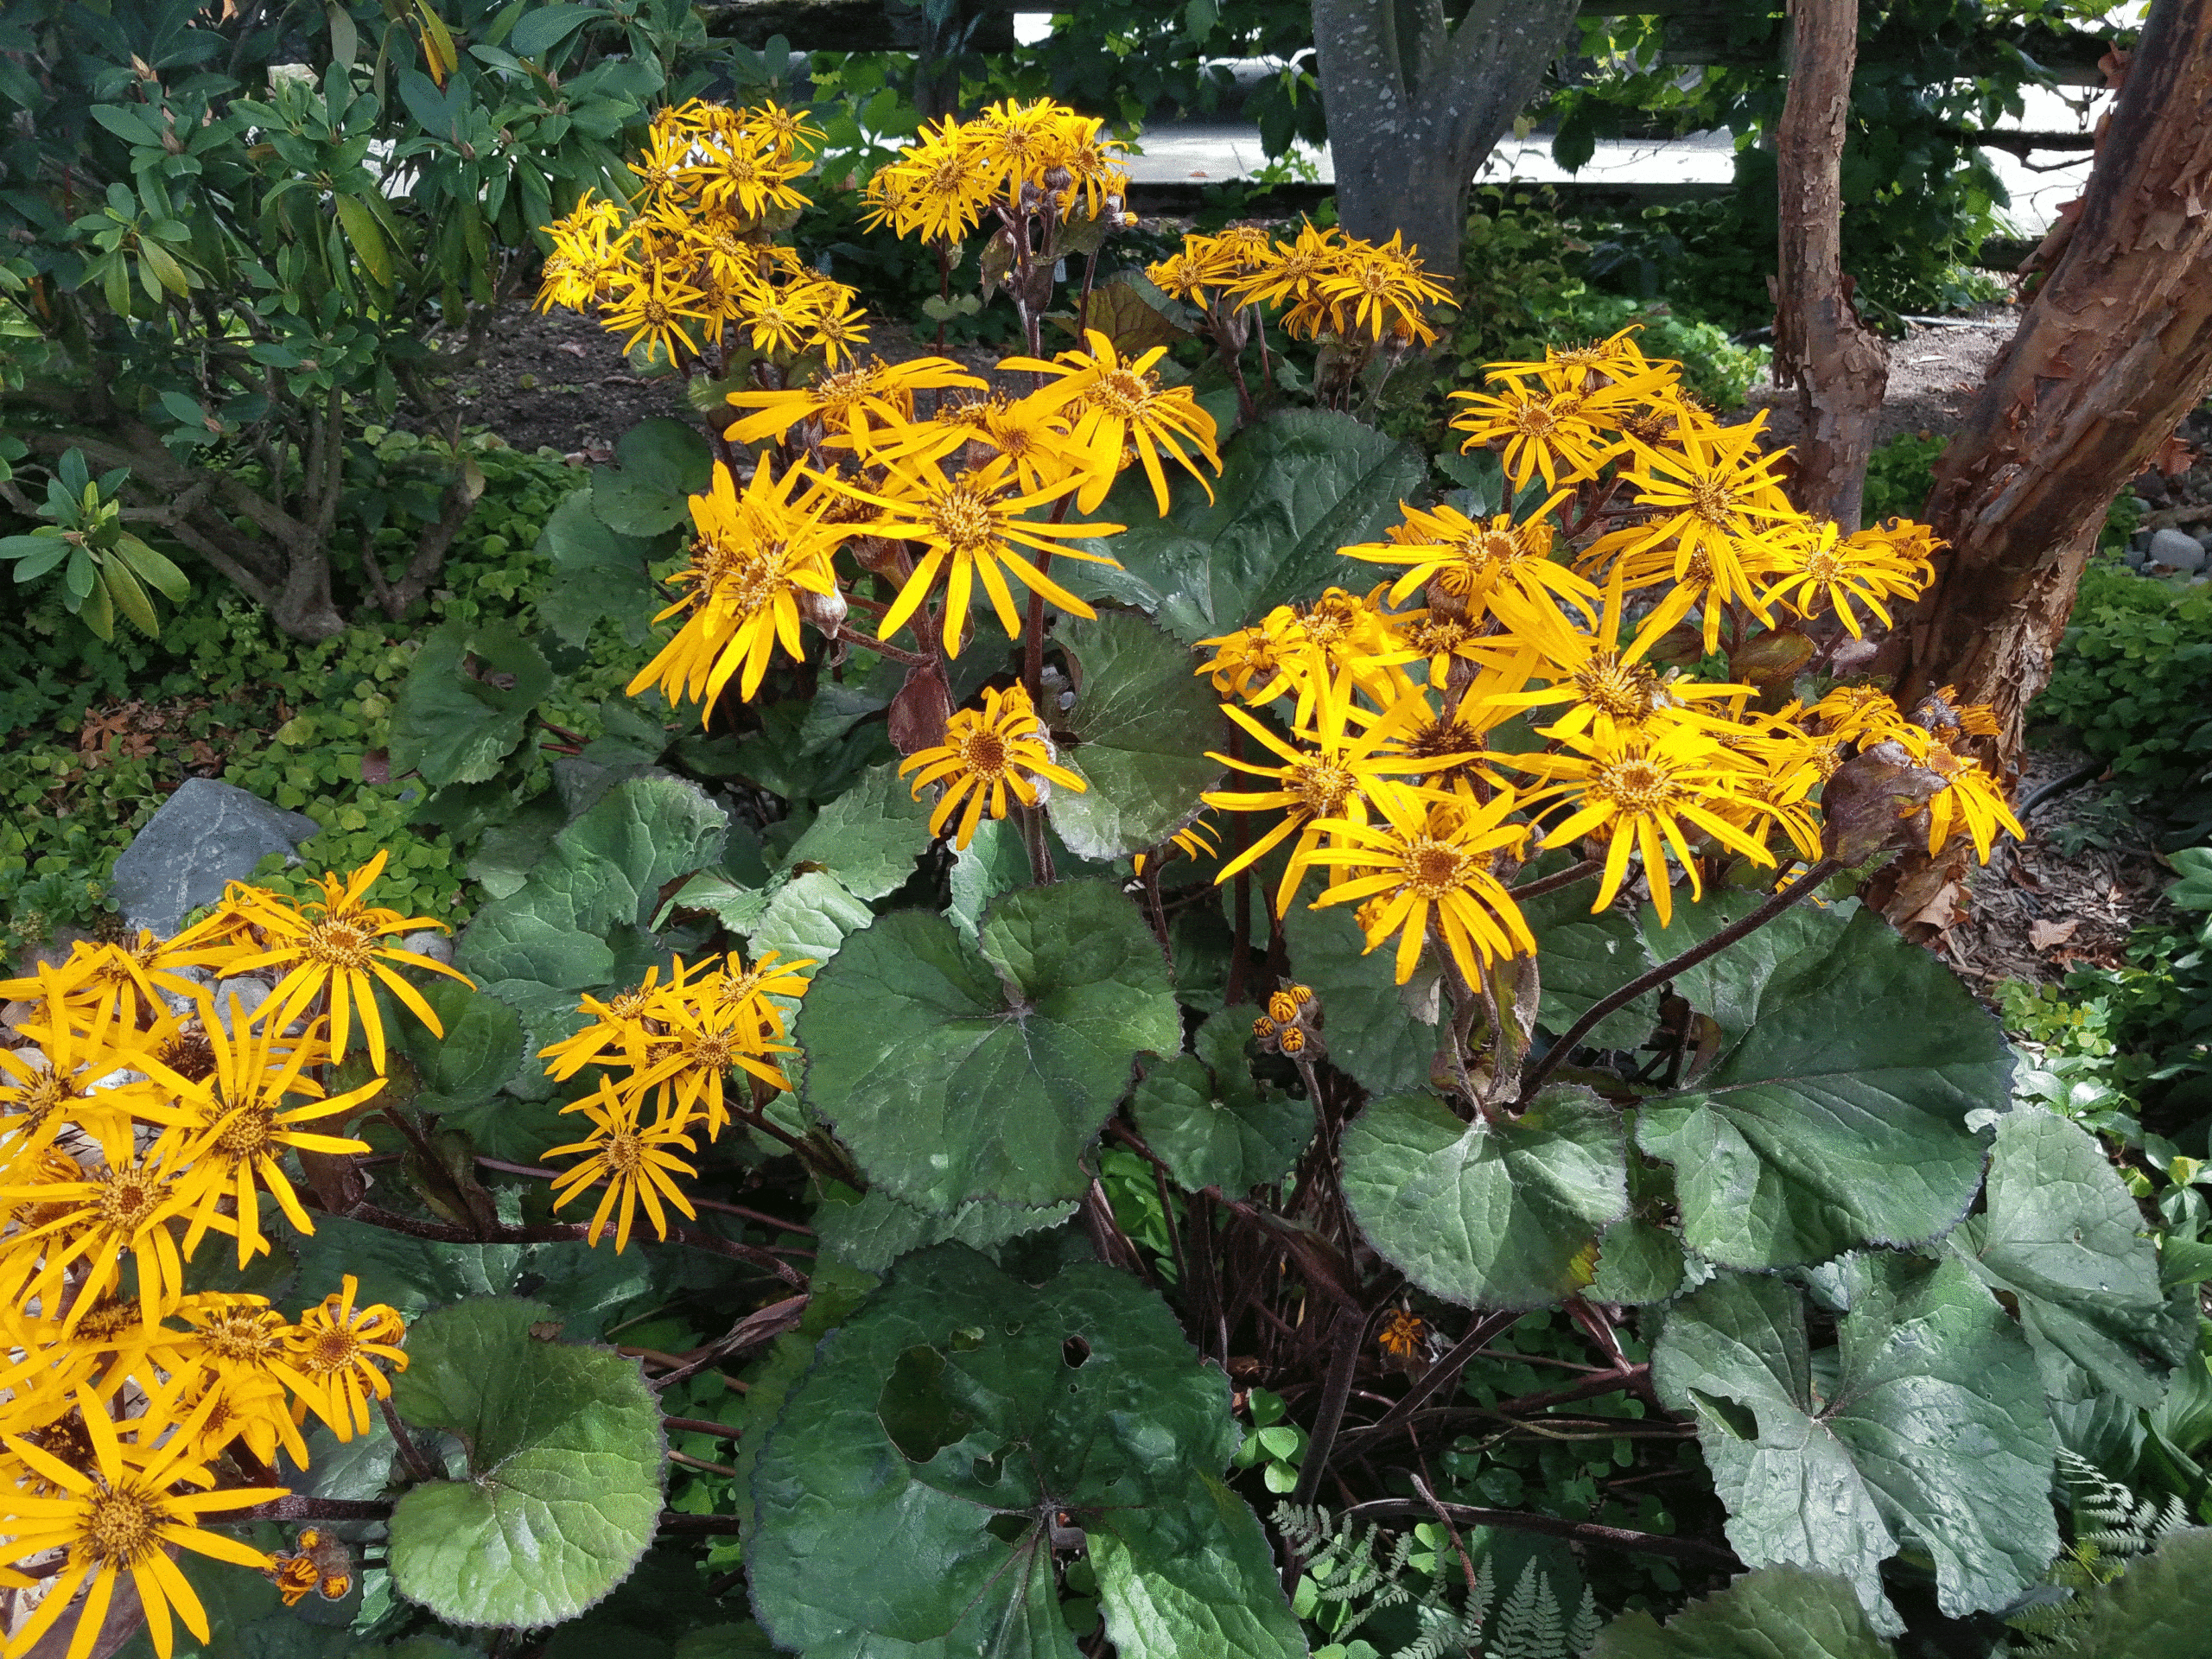 August brings a blast of summer color with this Ligularia dentata 'Desdemona' a bigleaf ligularia also known as leopard plant. Especially striking because it's a shade plant! 